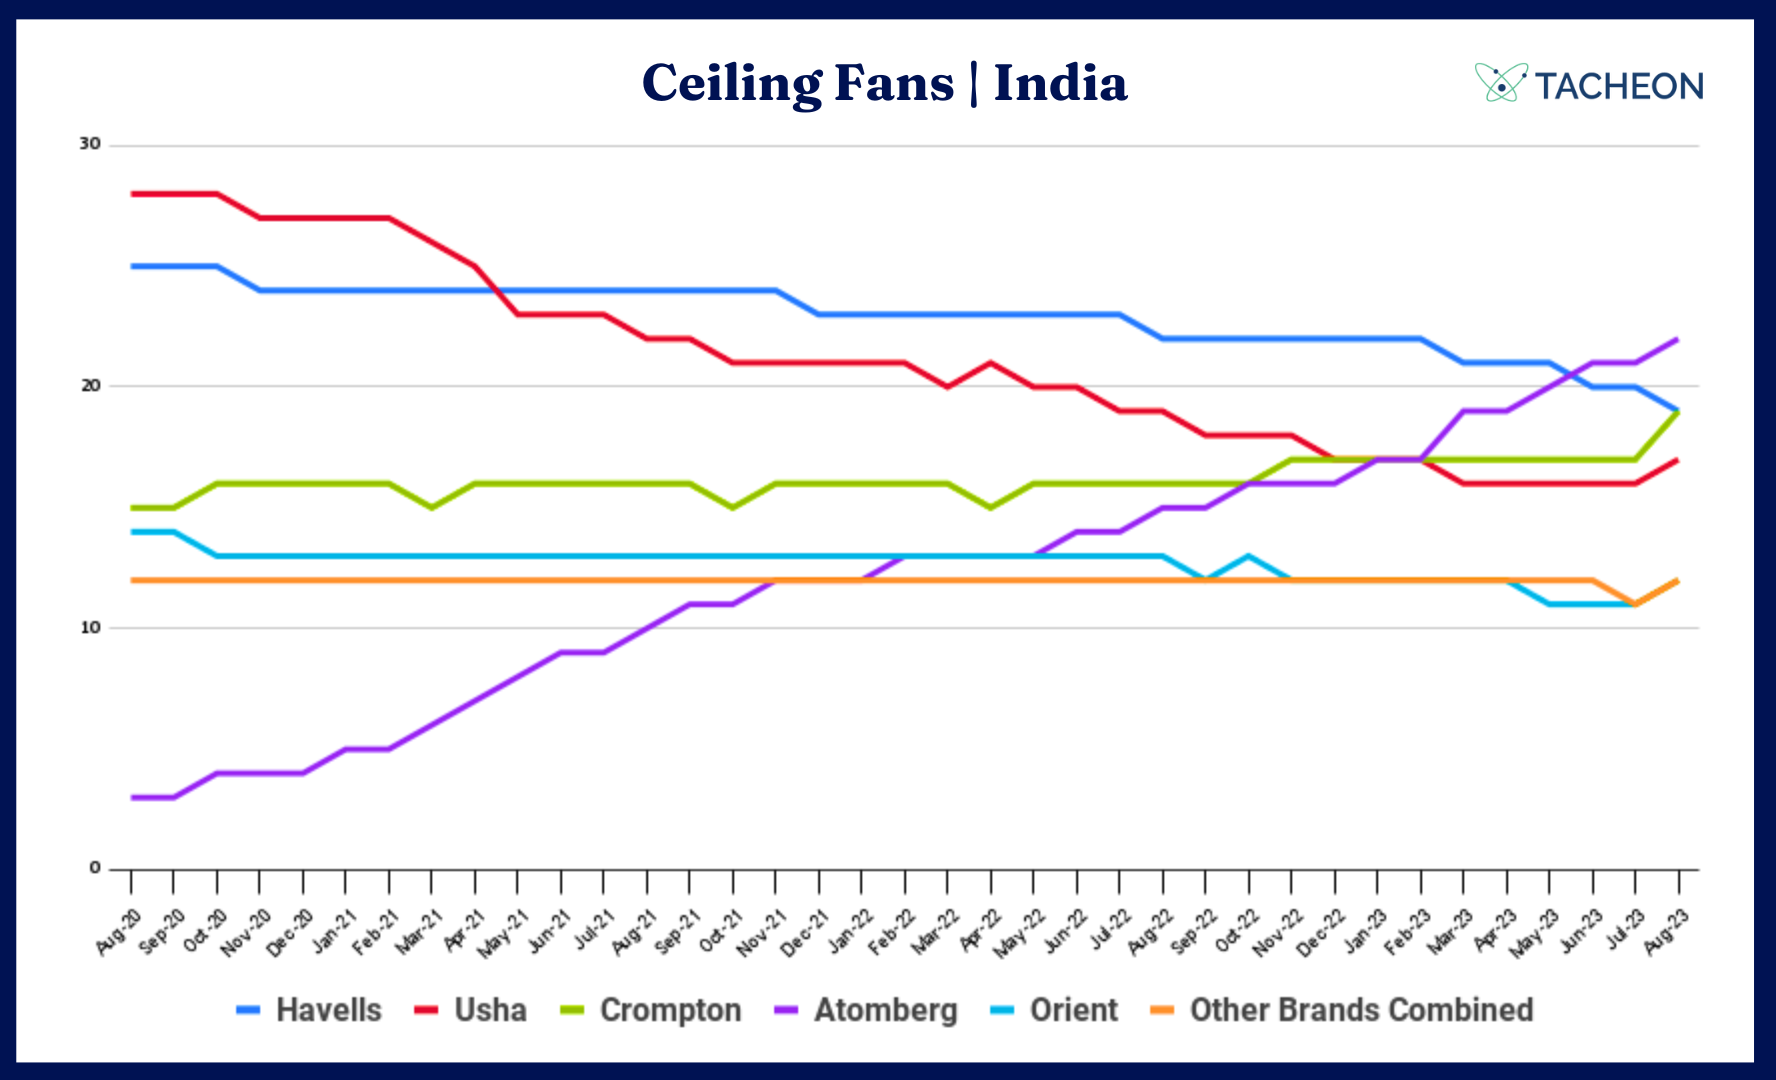 Share of Search Dashboard Ceiling Fans Category India